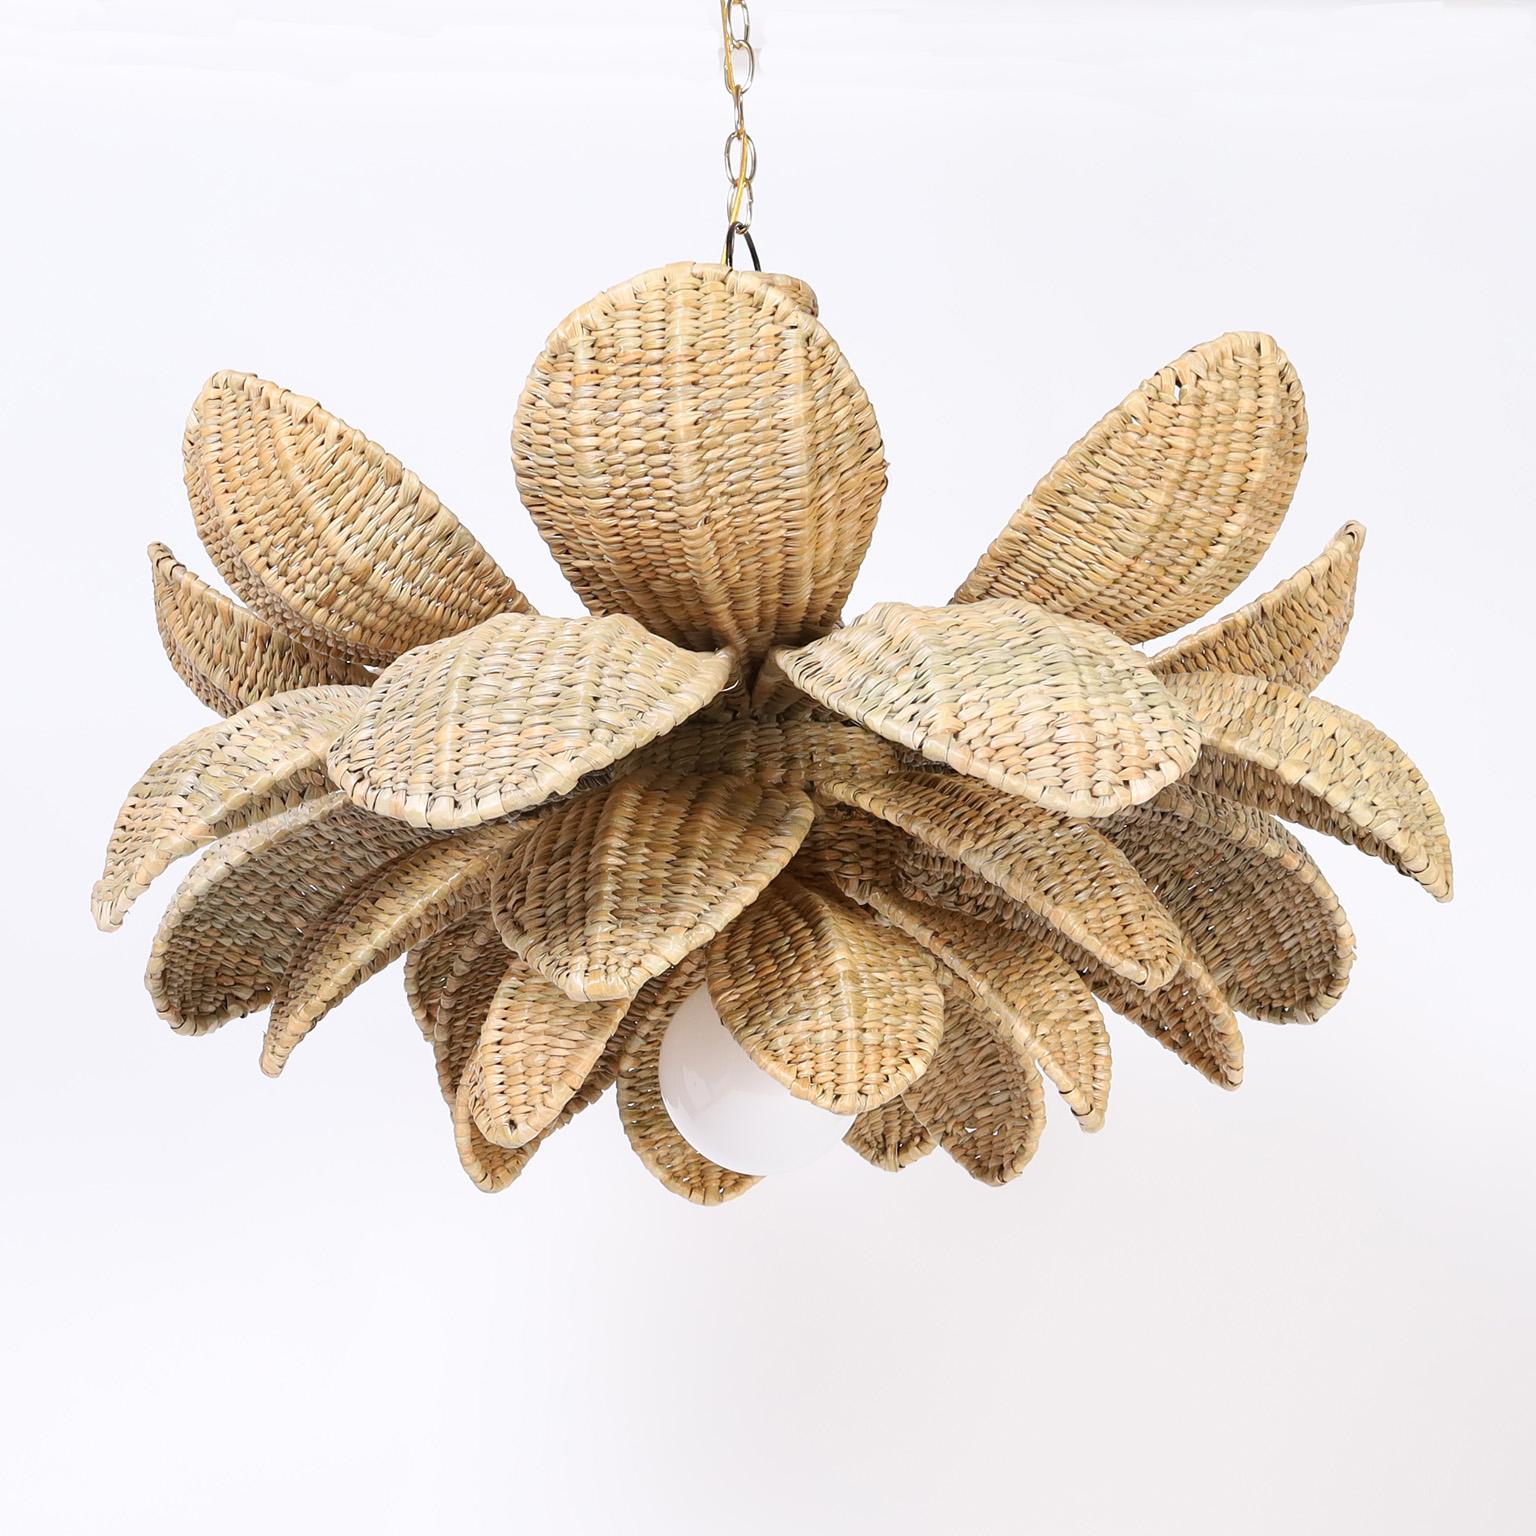 Chic wicker light fixture or pendant crafted with a sturdy metal frame ambitiously wrapped in reed in a four tiered lotus flower form, exclusively designed and offered by F. S. Henemader antiques as part of the FS Flores Collection.